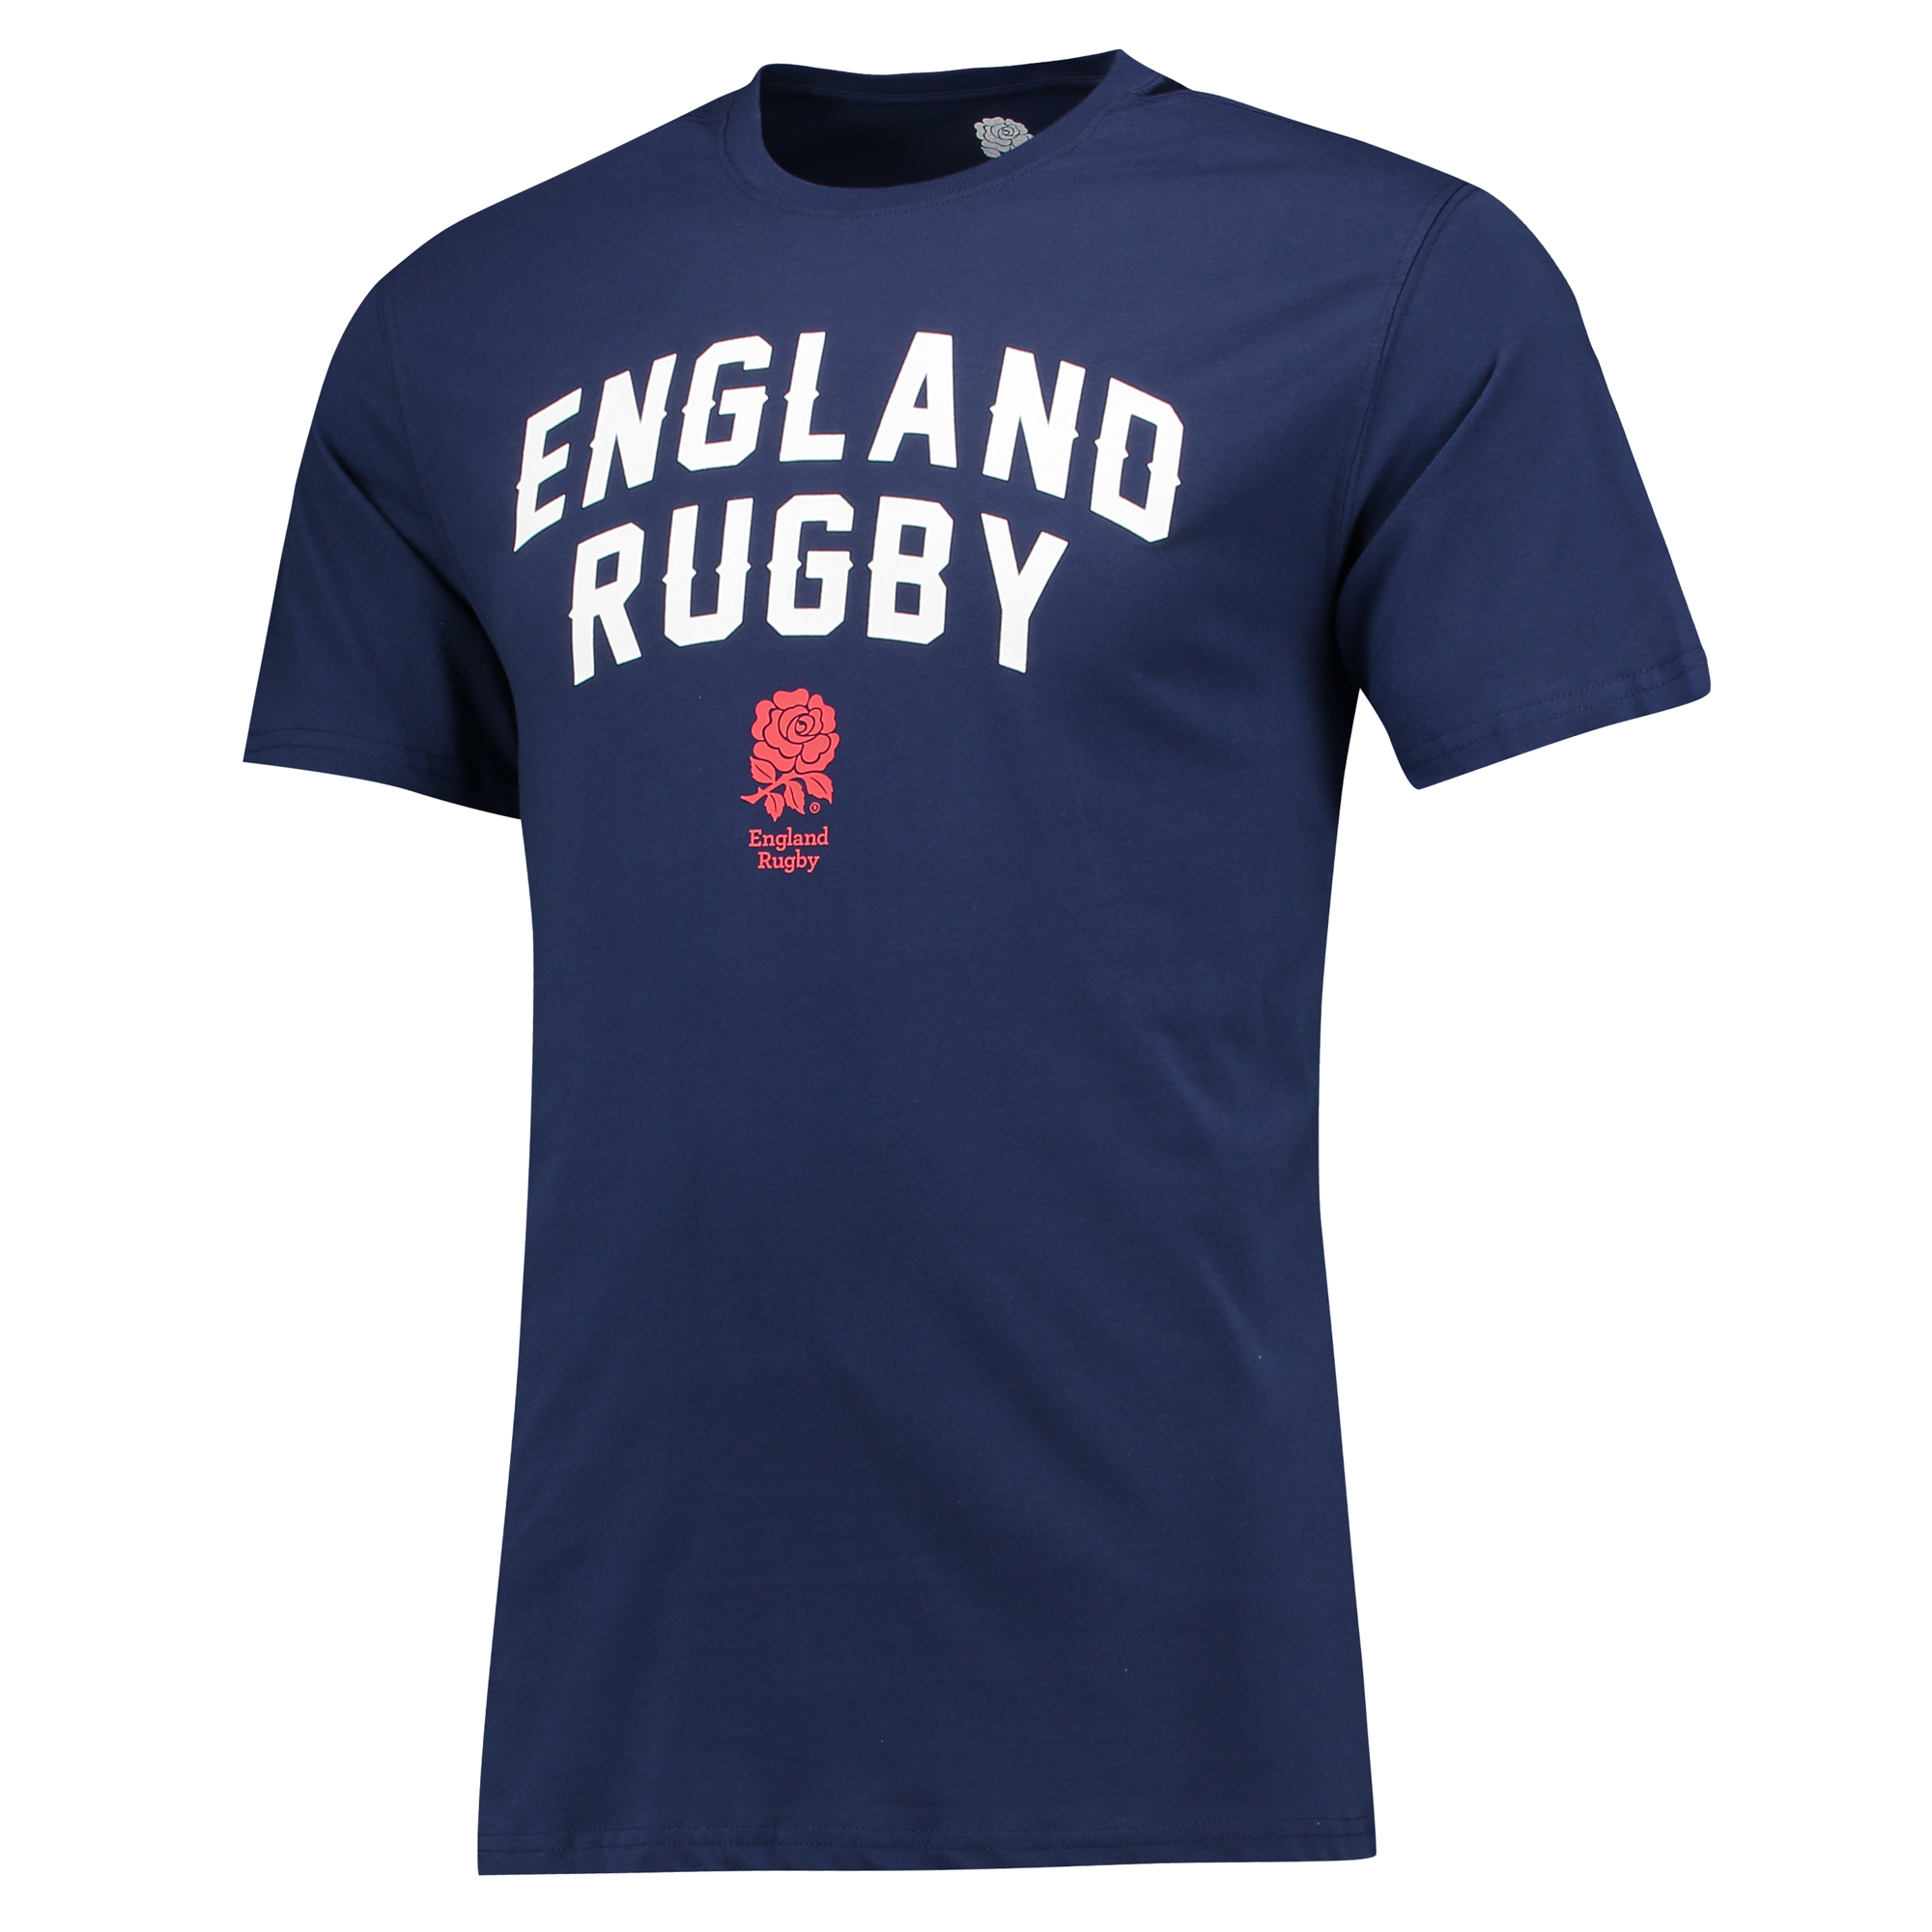 The England Rugby online store official rugby club, international